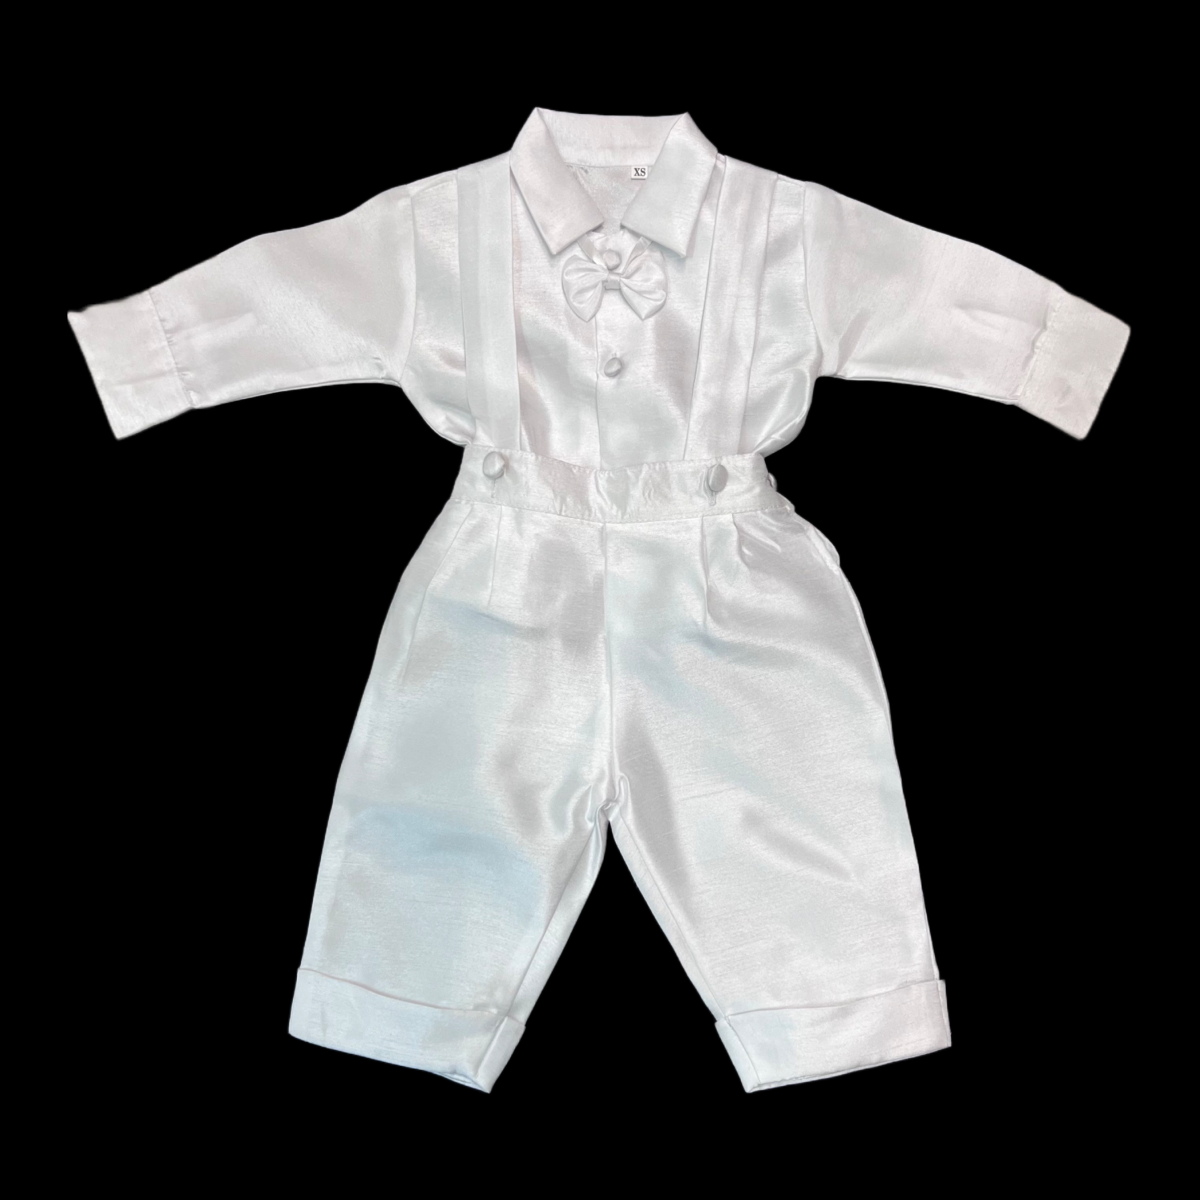 5-Piece Square Pattern Christening Outfit